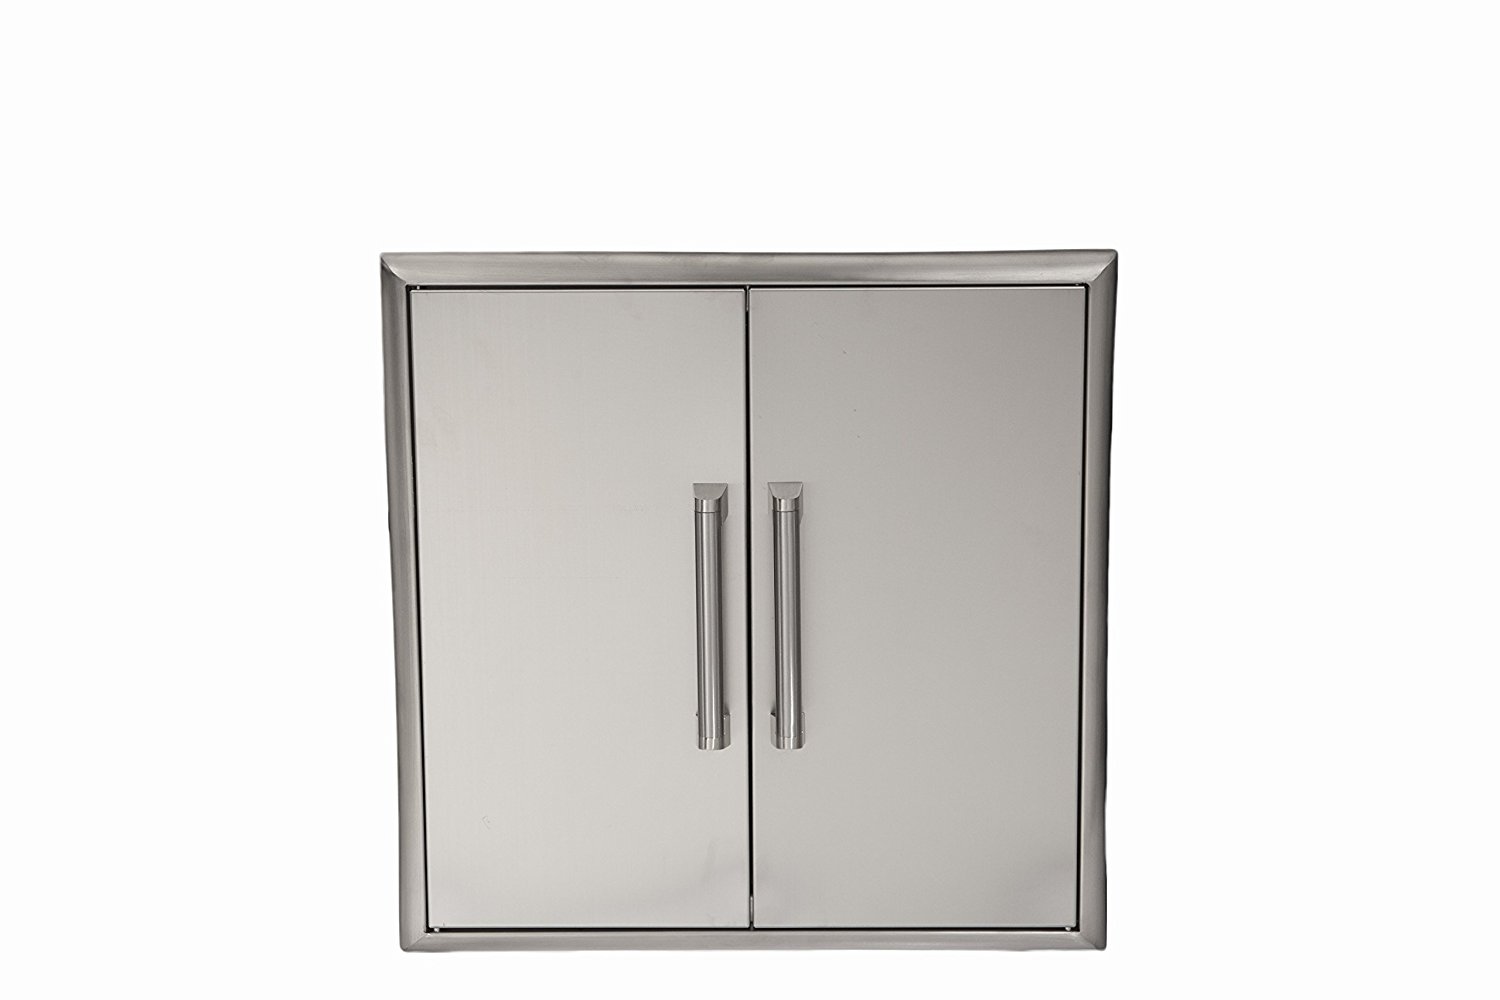 Coyote Double Access Doors, 31″/78 cm, Stainless Steel